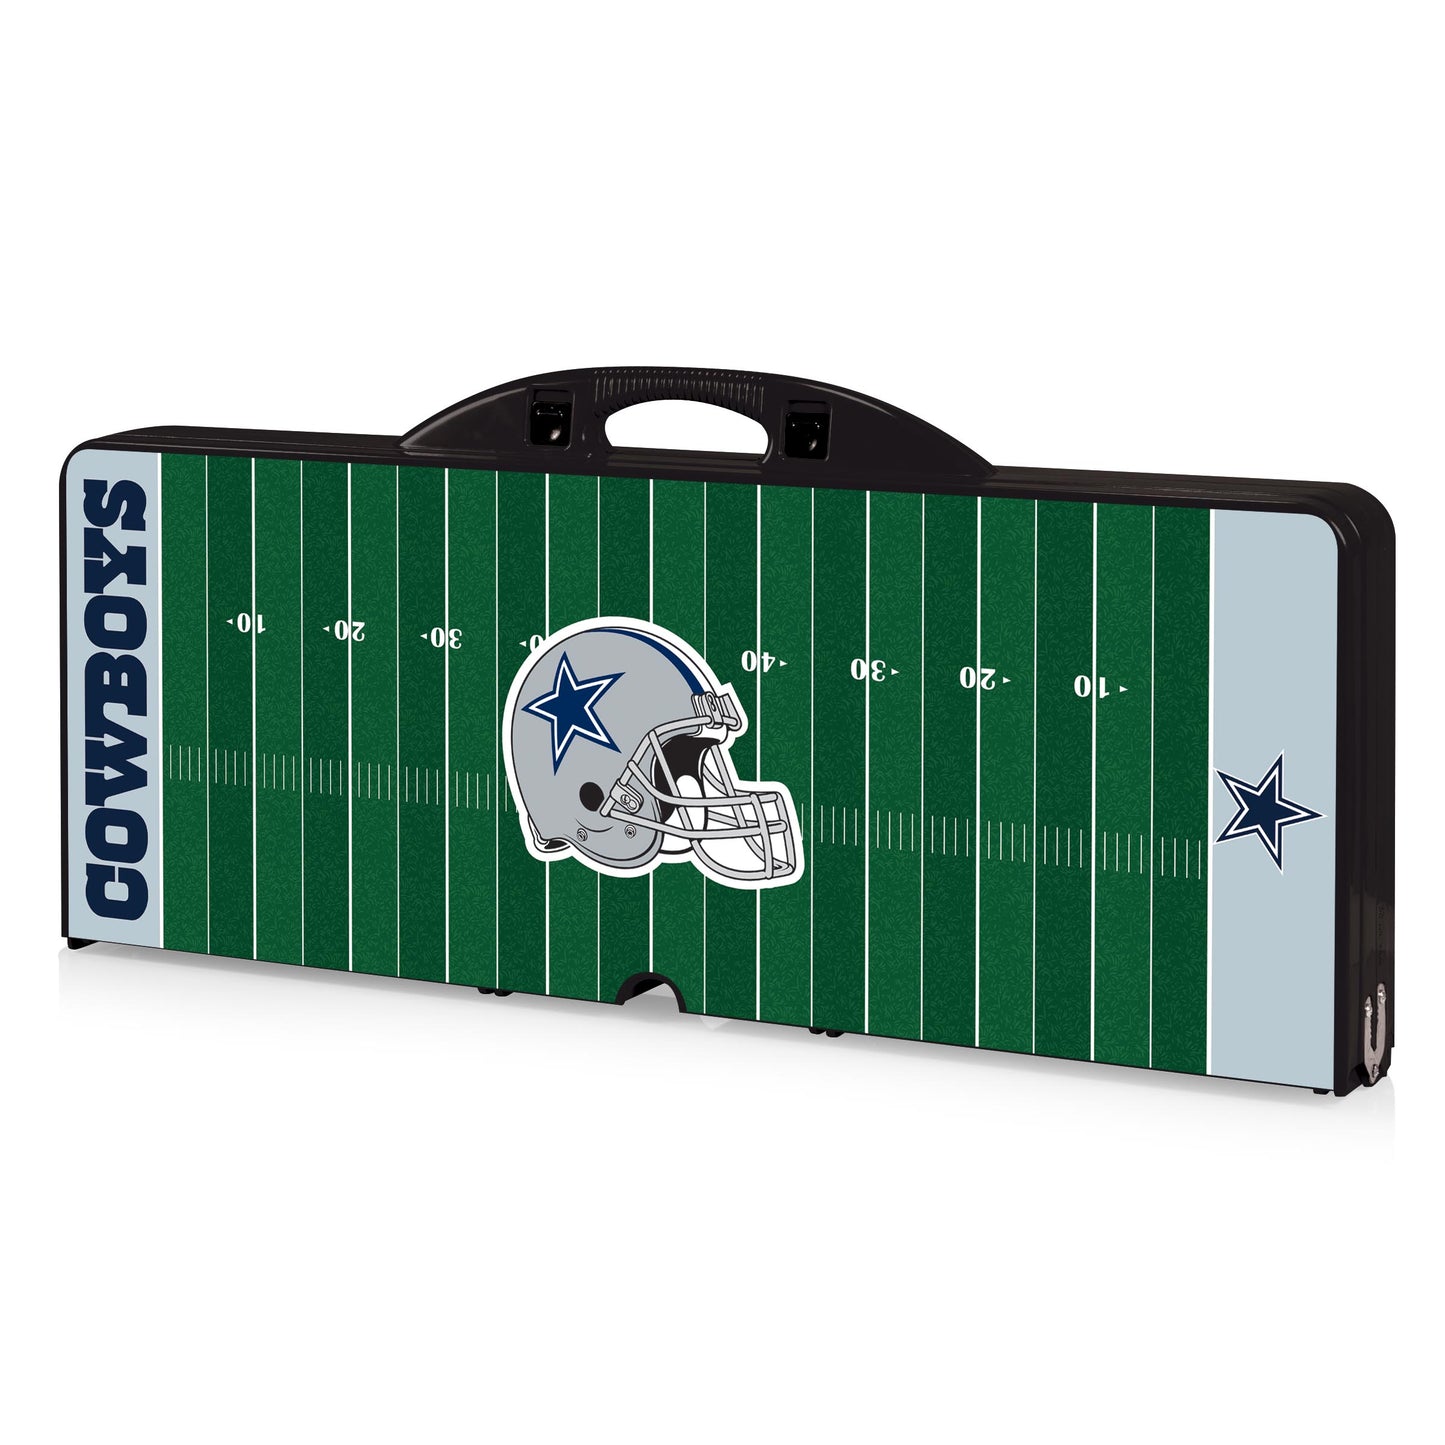 Football Field - Dallas Cowboys - Picnic Table Portable Folding Table with Seats